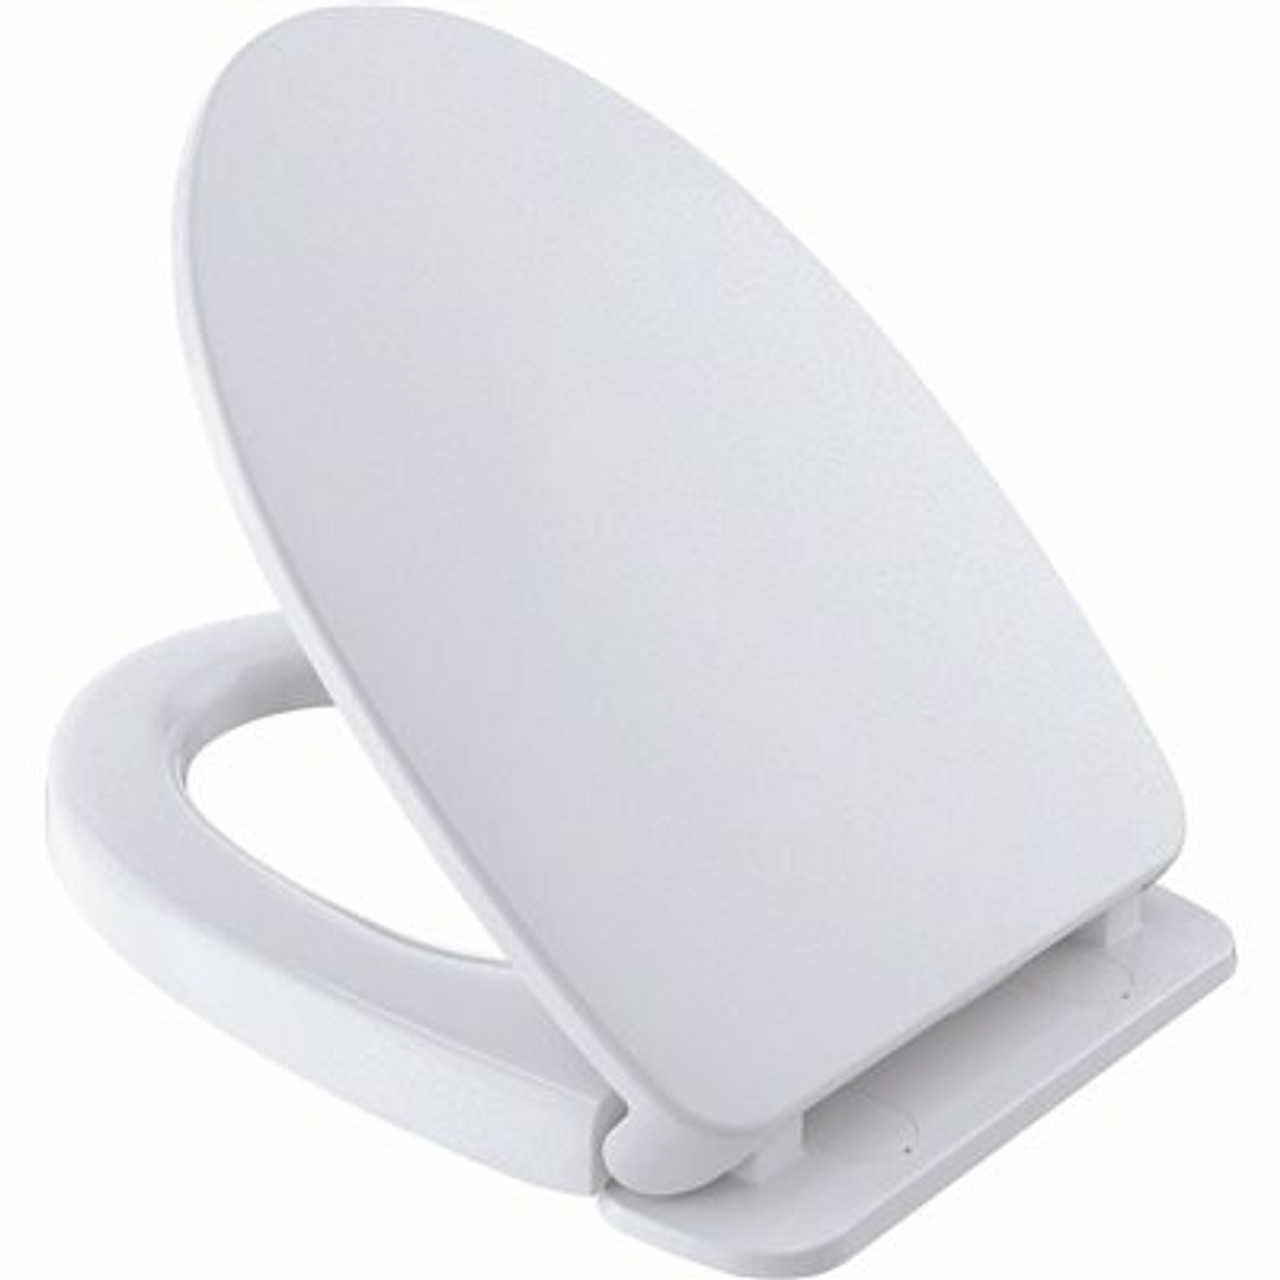 Toto Traditional Softclose Elongated Closed Front Toilet Seat In Cotton White